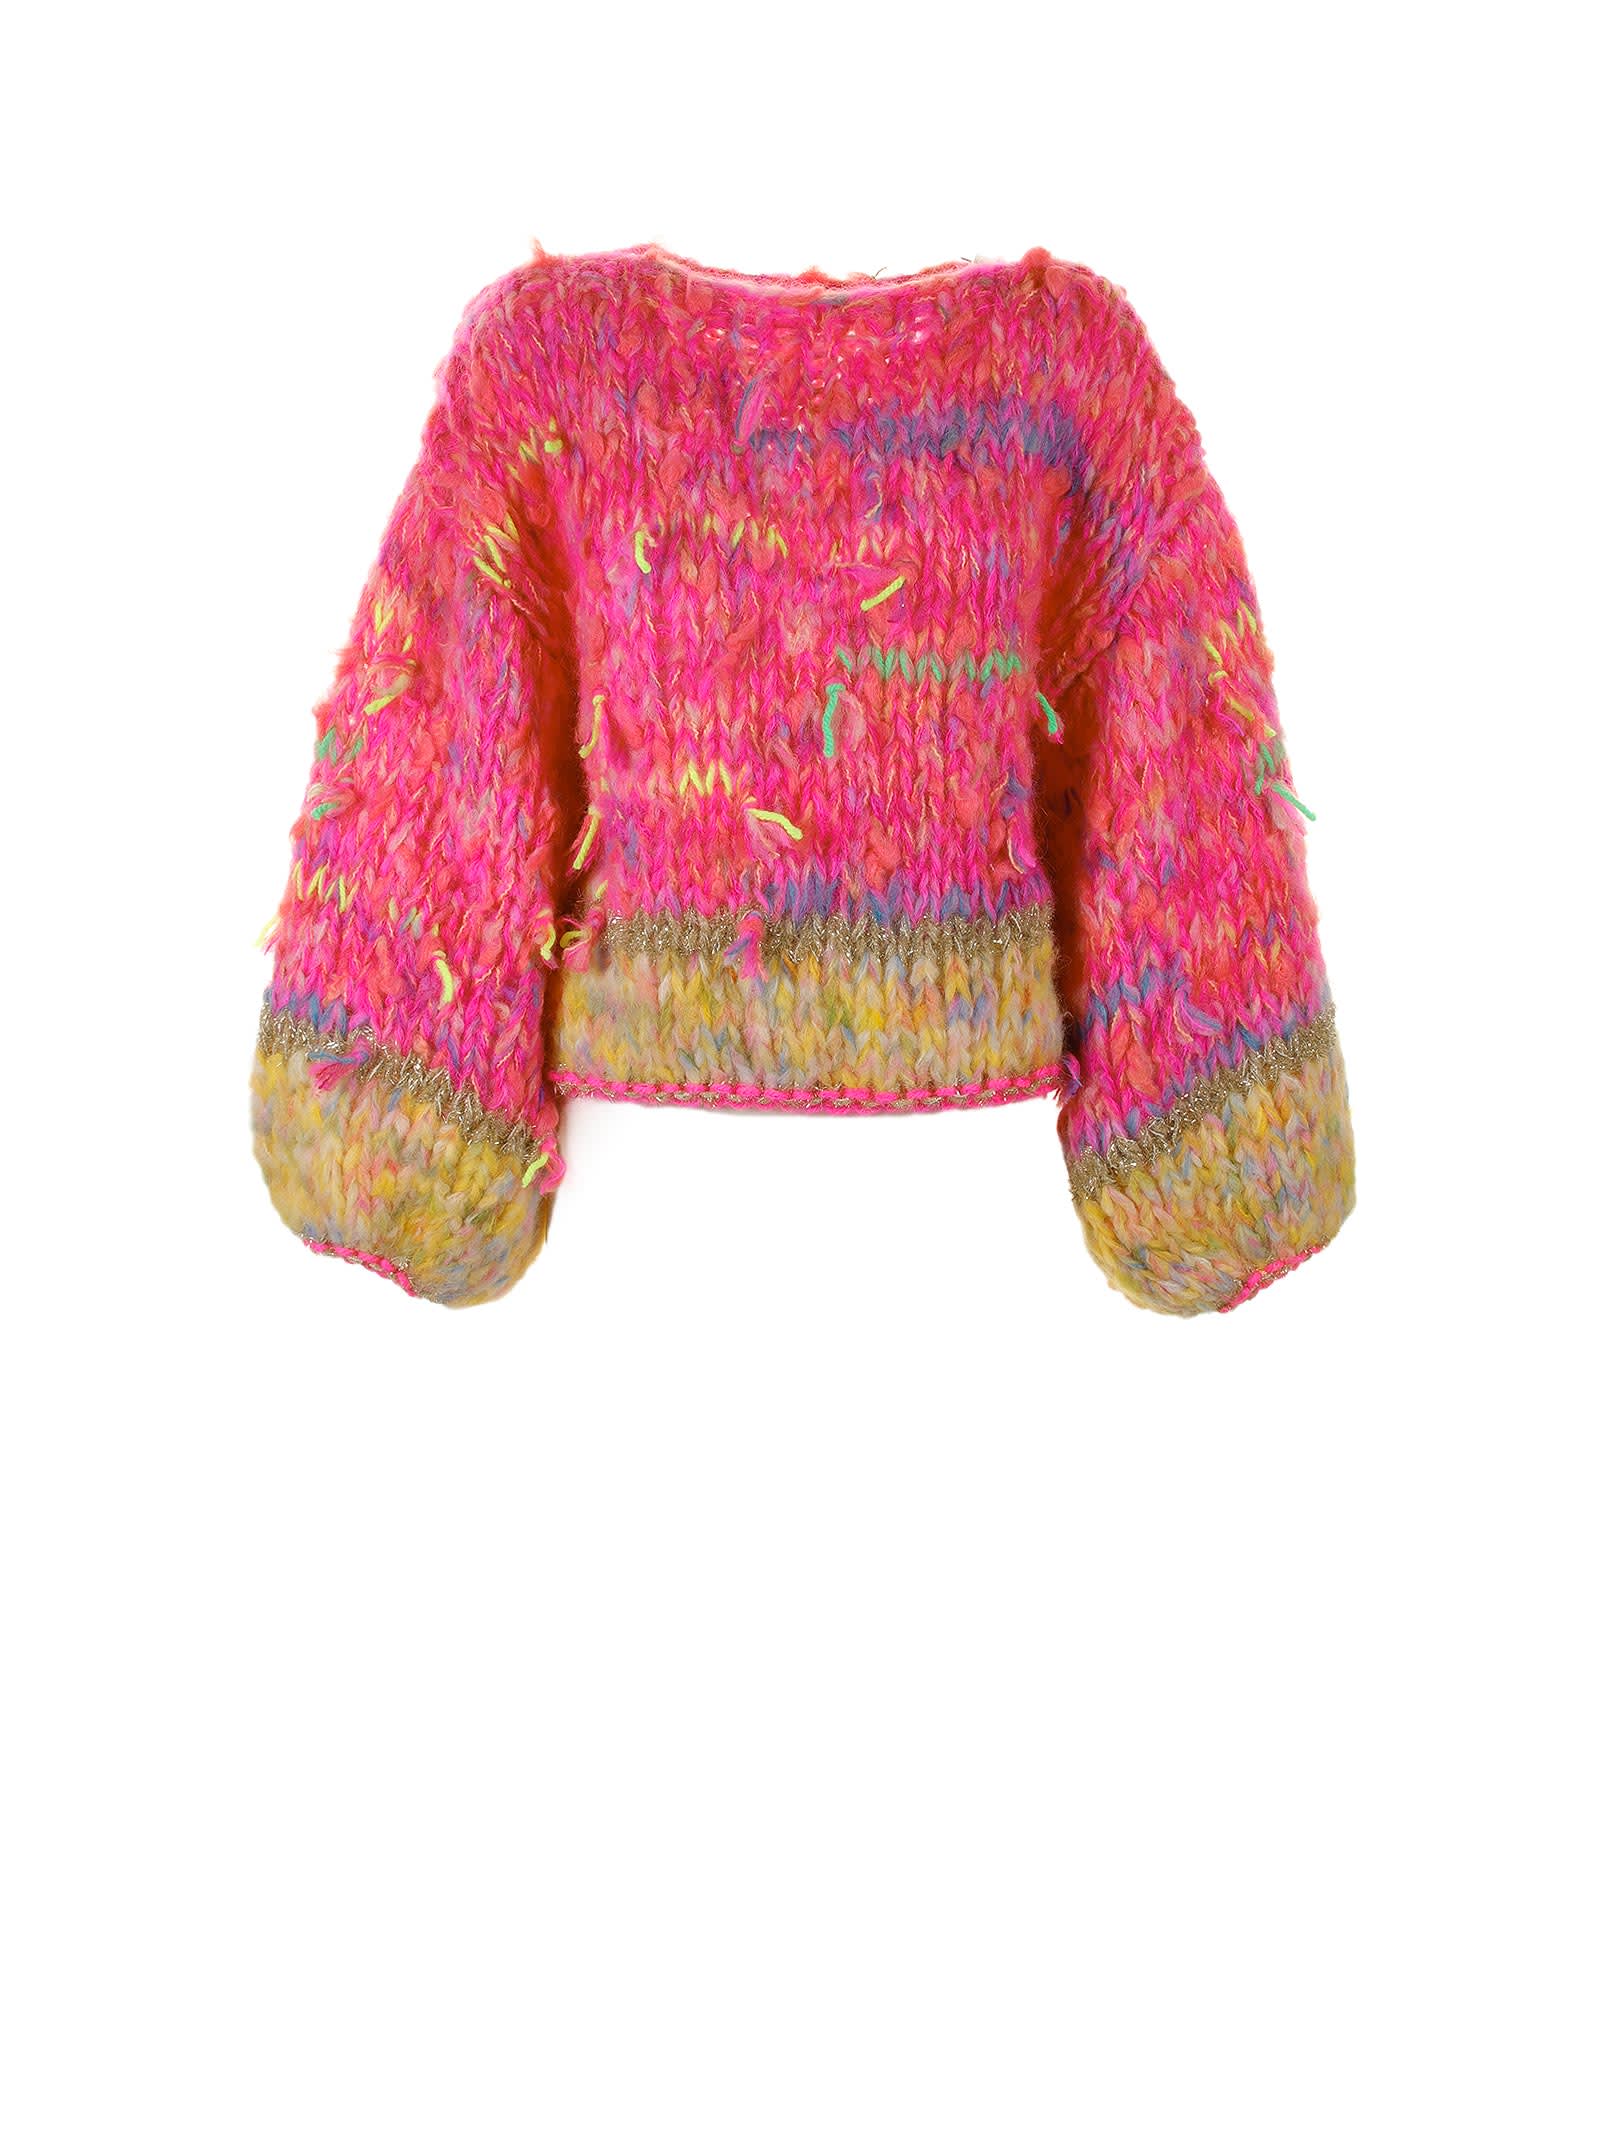 Nizhoni Sweater Thora Hand Knitted With Multicolored Yarns In Rosa